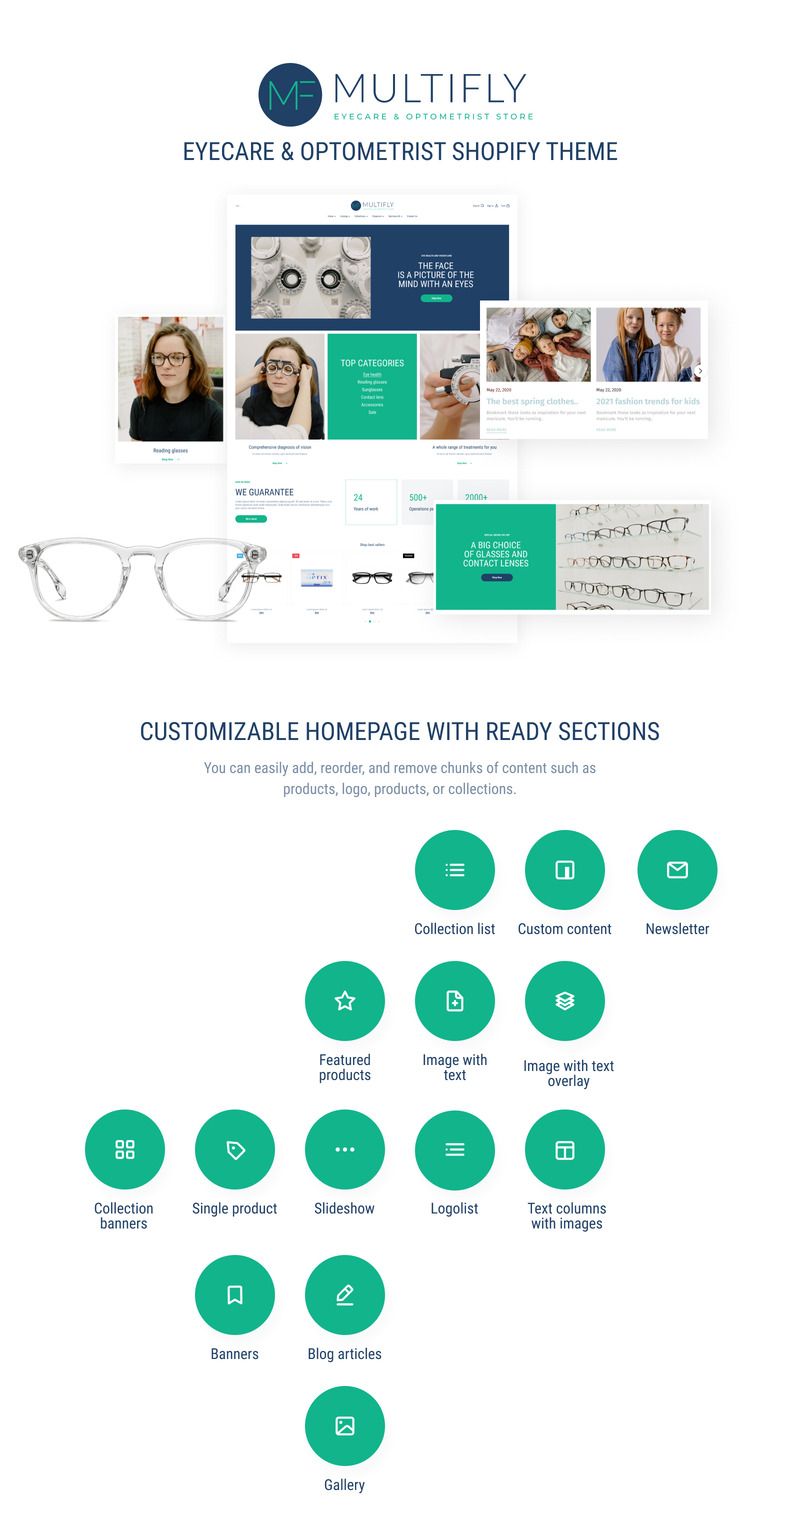 Multifly Eyecare & Optometrist Shopify theme - Features Image 1